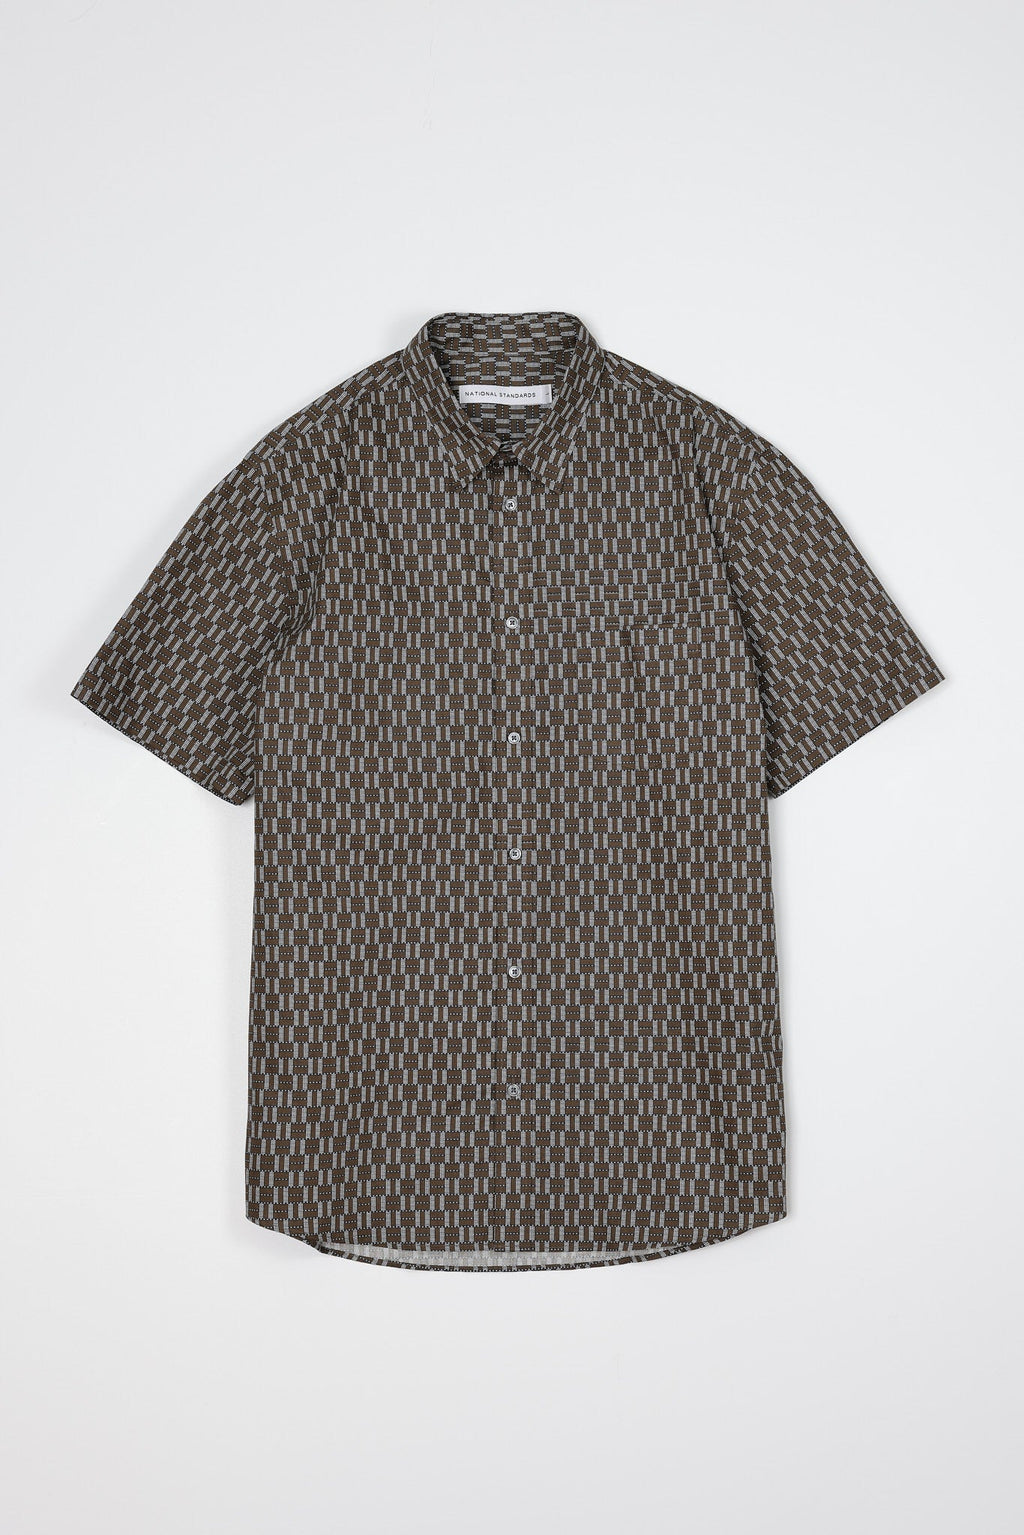 Japanese Graphic Grid Print in Khaki and Blue 01